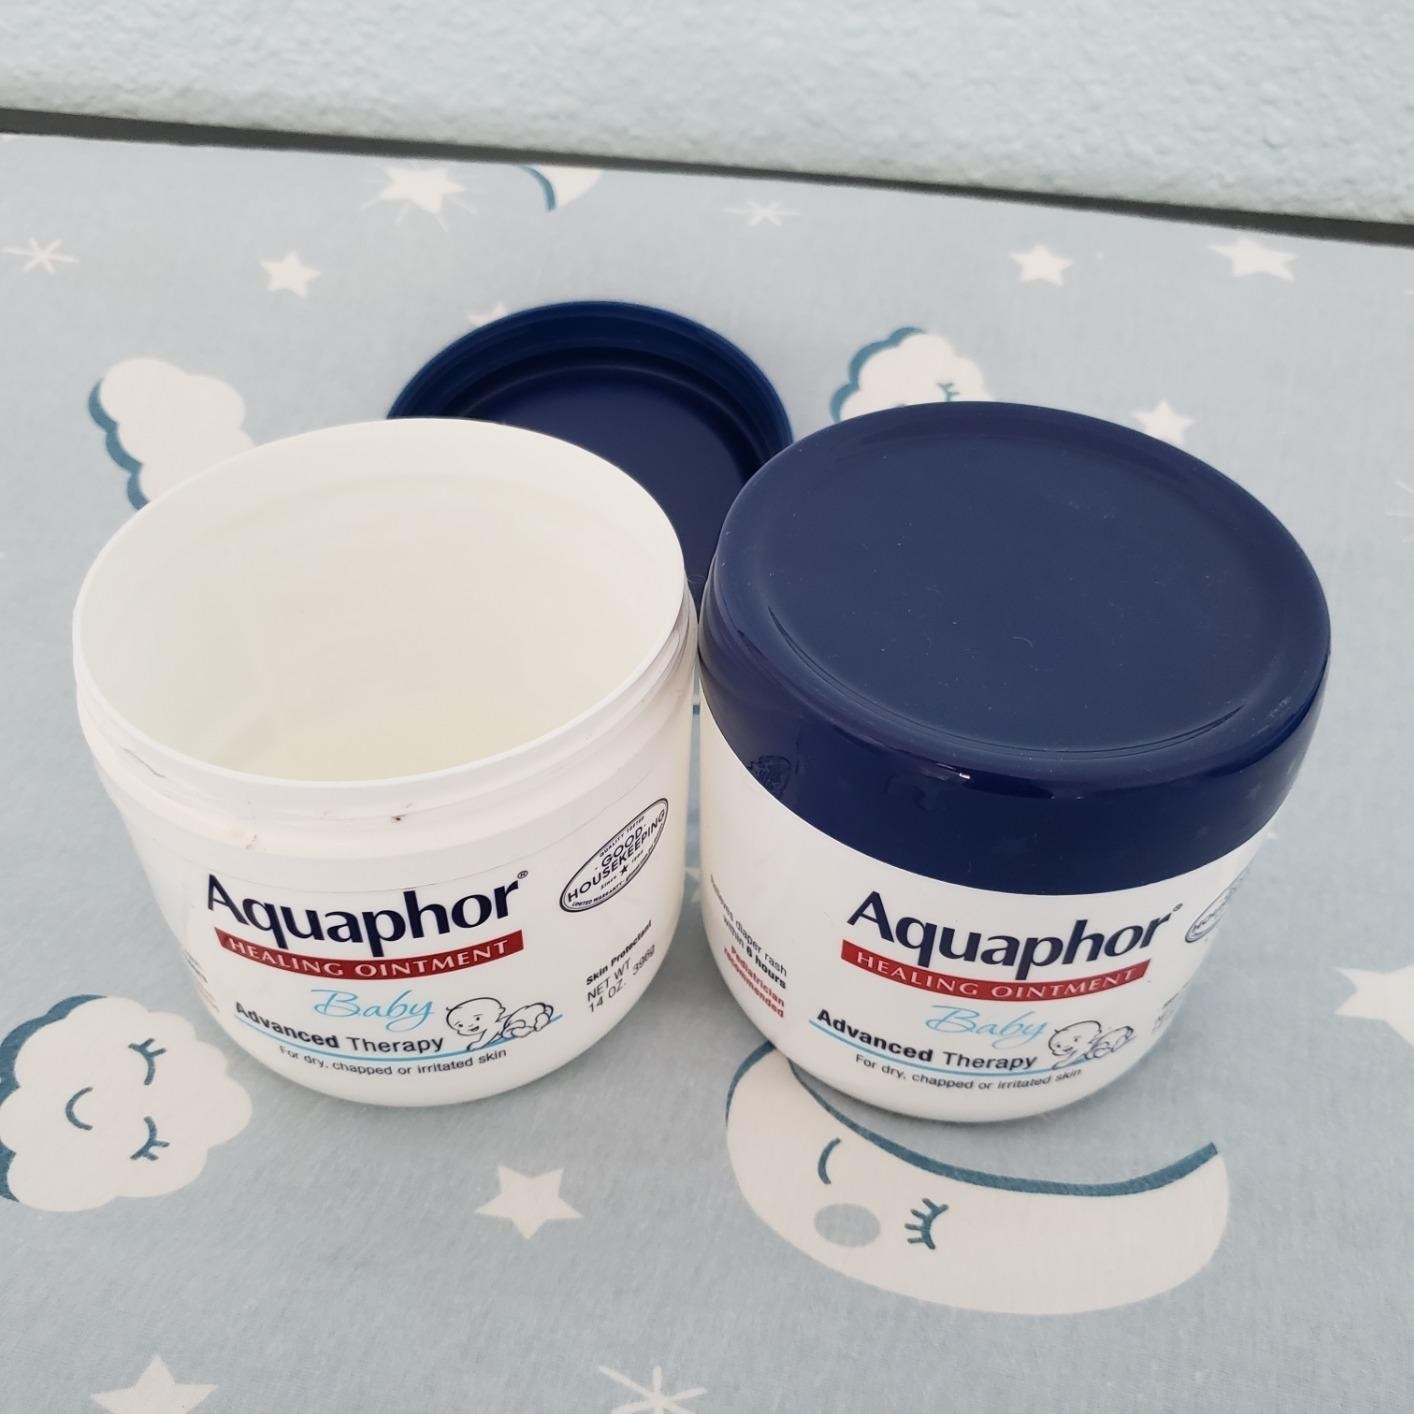 containers of the Aquaphor healing ointment